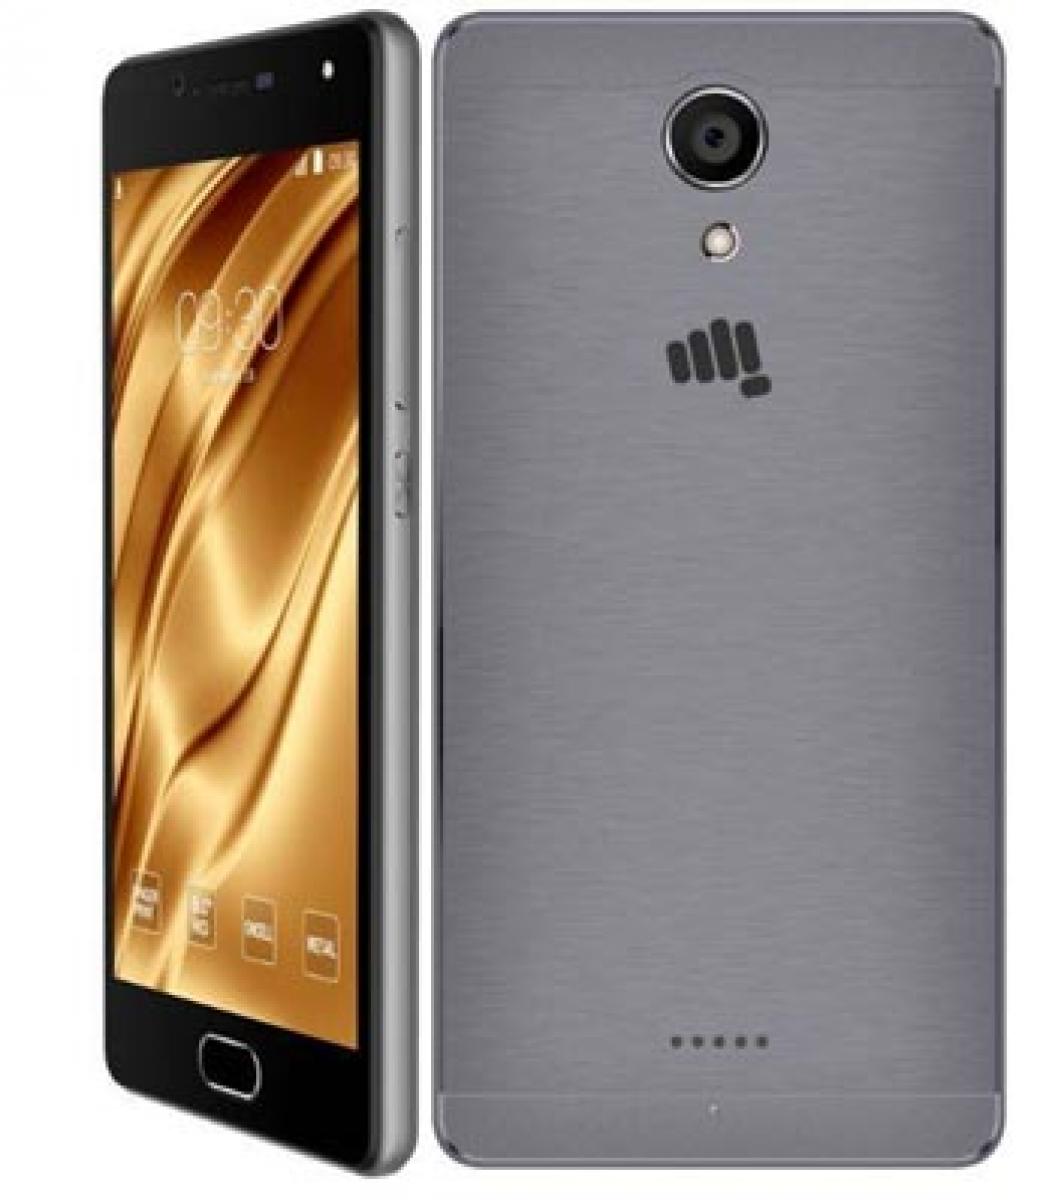 Check out new Micromax Canvas Unite 4 Plus smartphone with Android 6.0 Marshmallow